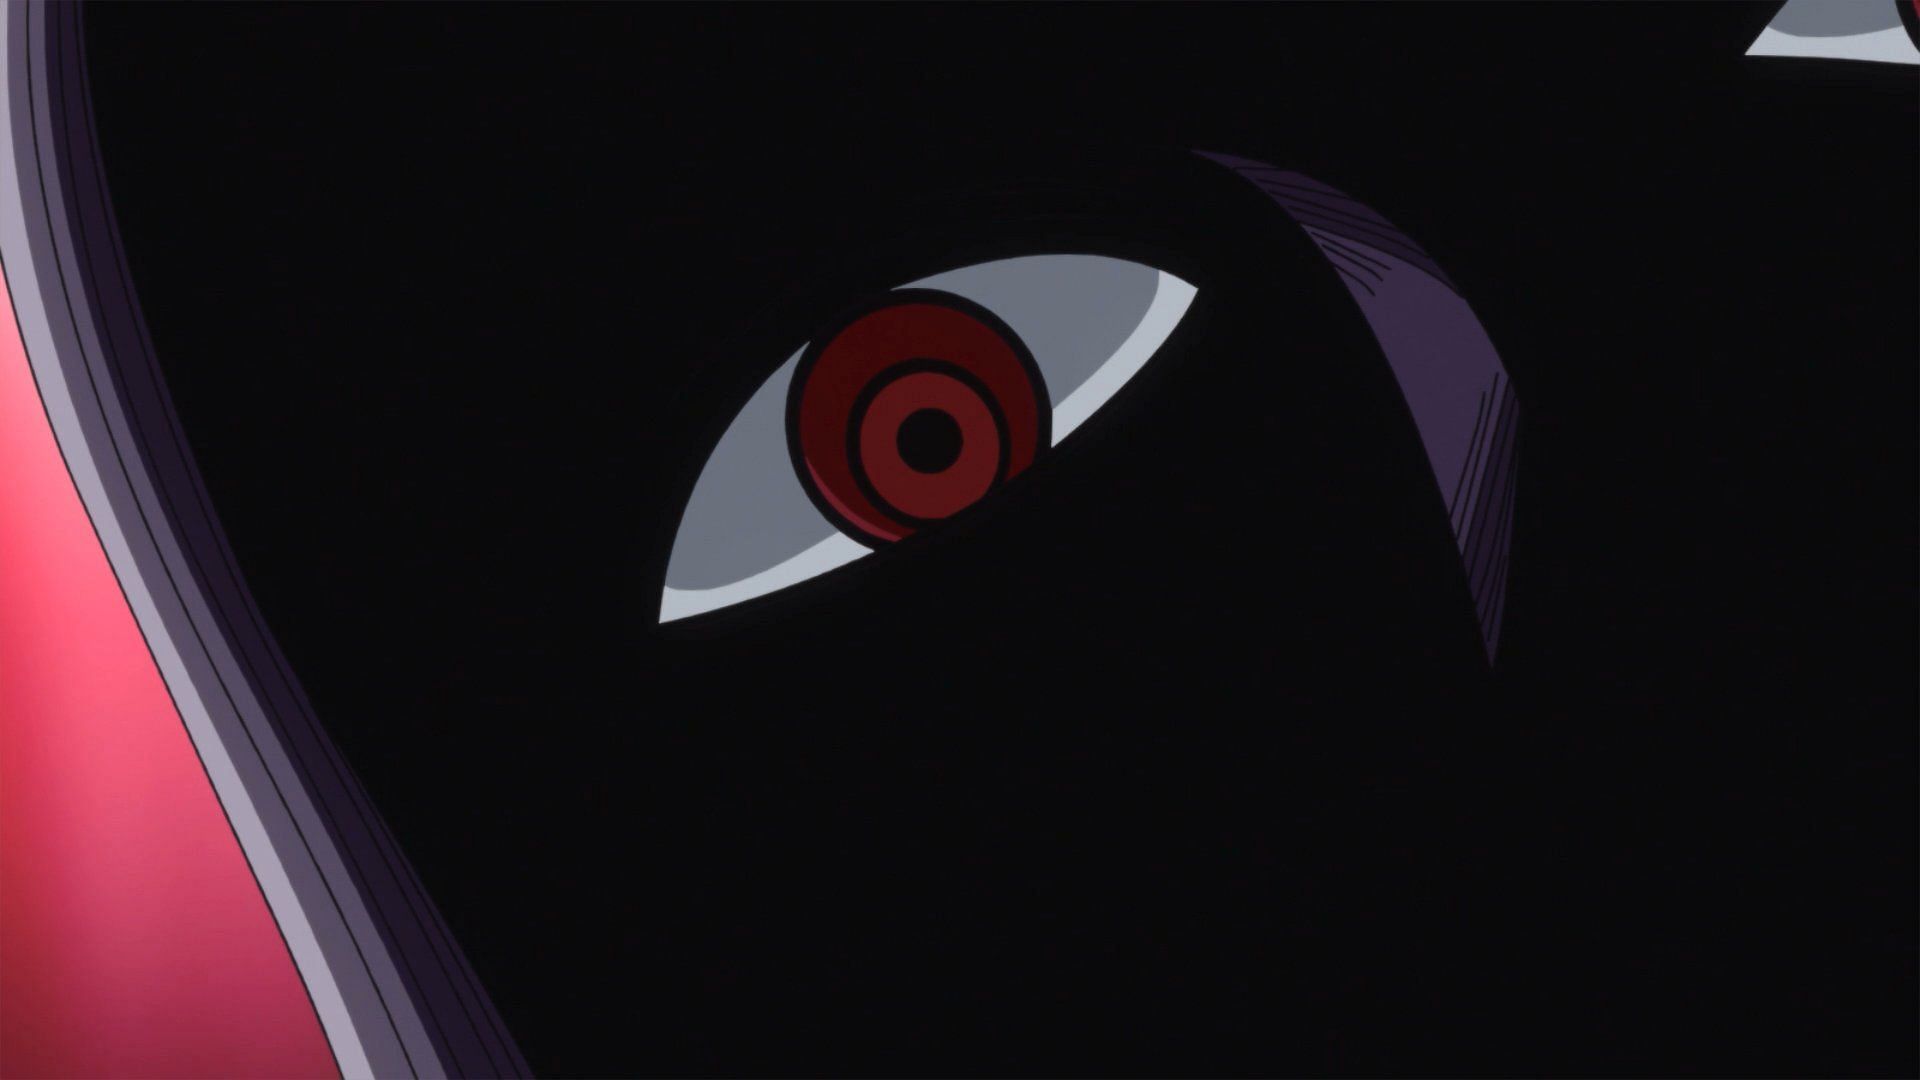 Nefertari Lily may be the key to understand the identity of the enigmatic Im-sama (Image via Toei Animation, One Piece)